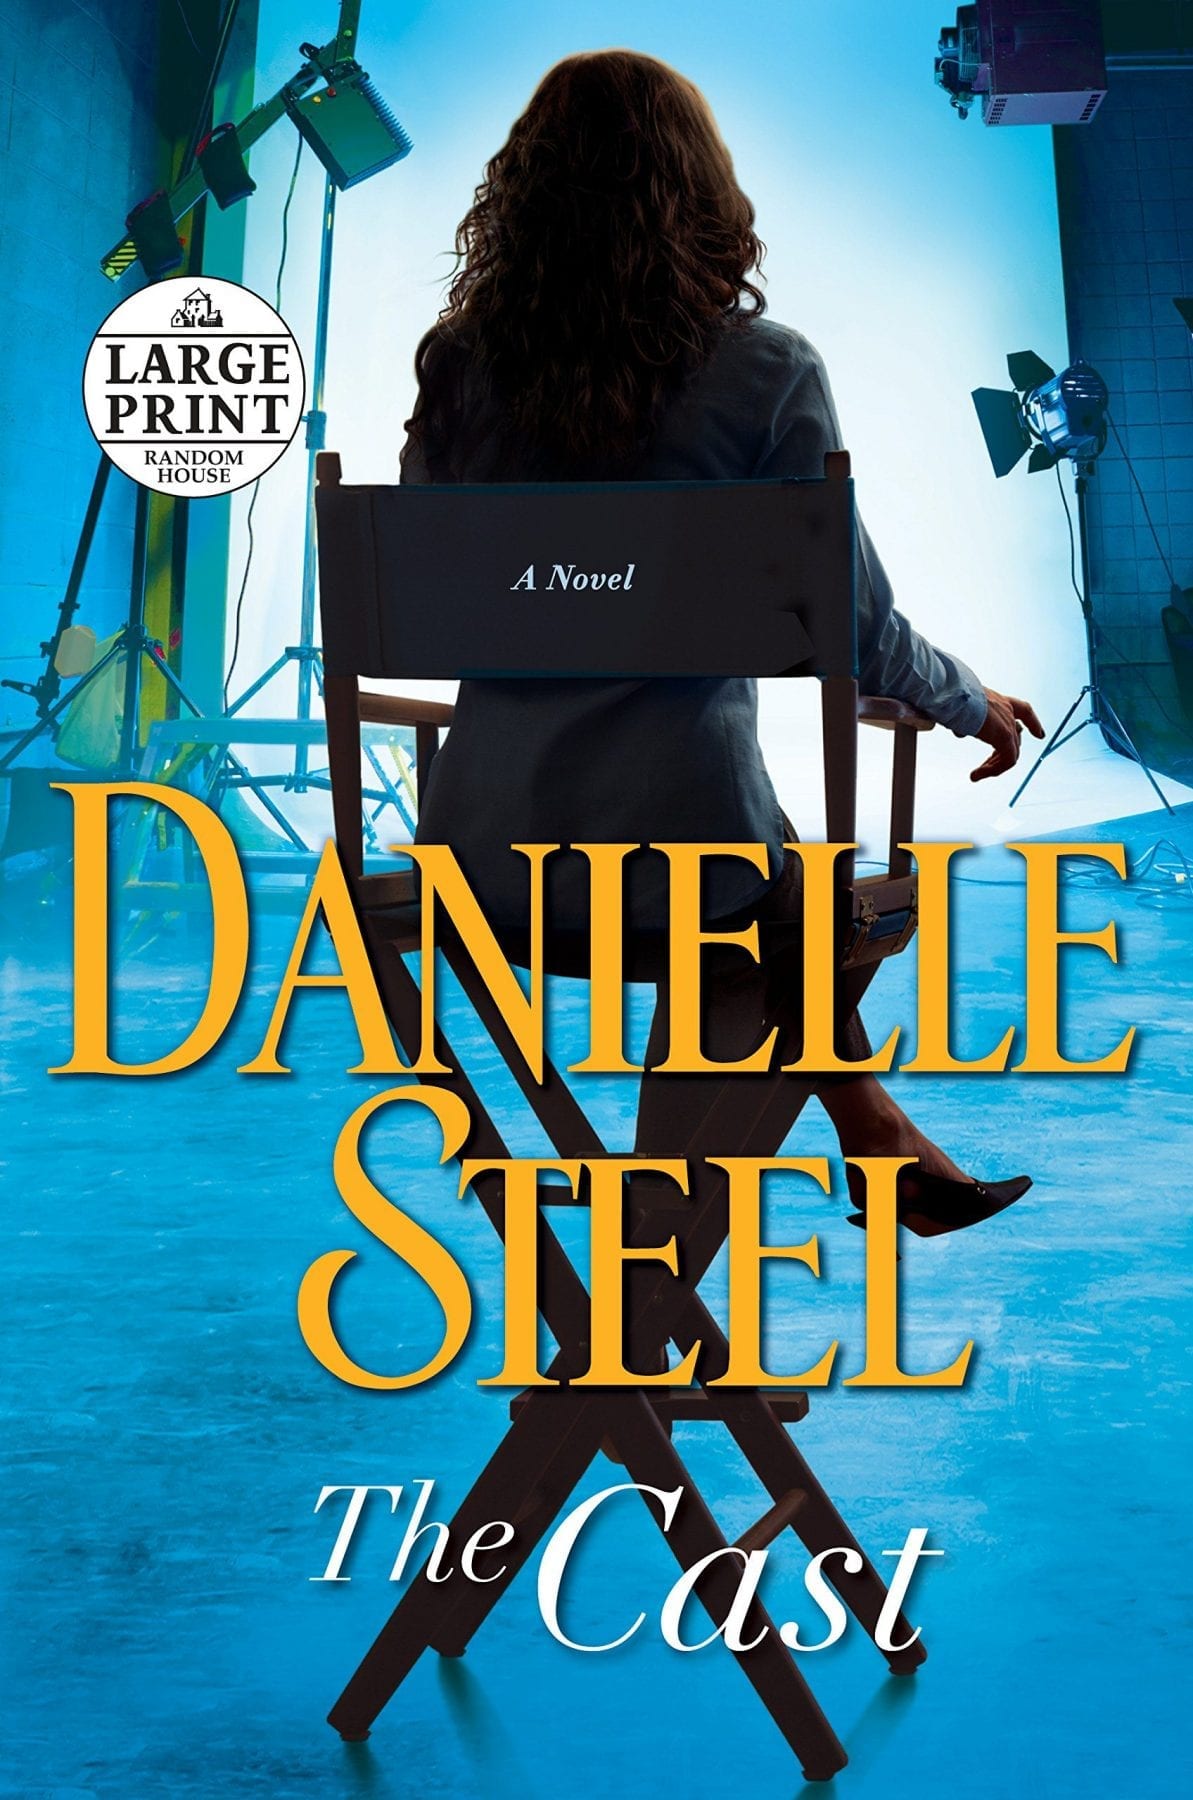 The Cast by Danielle Steel